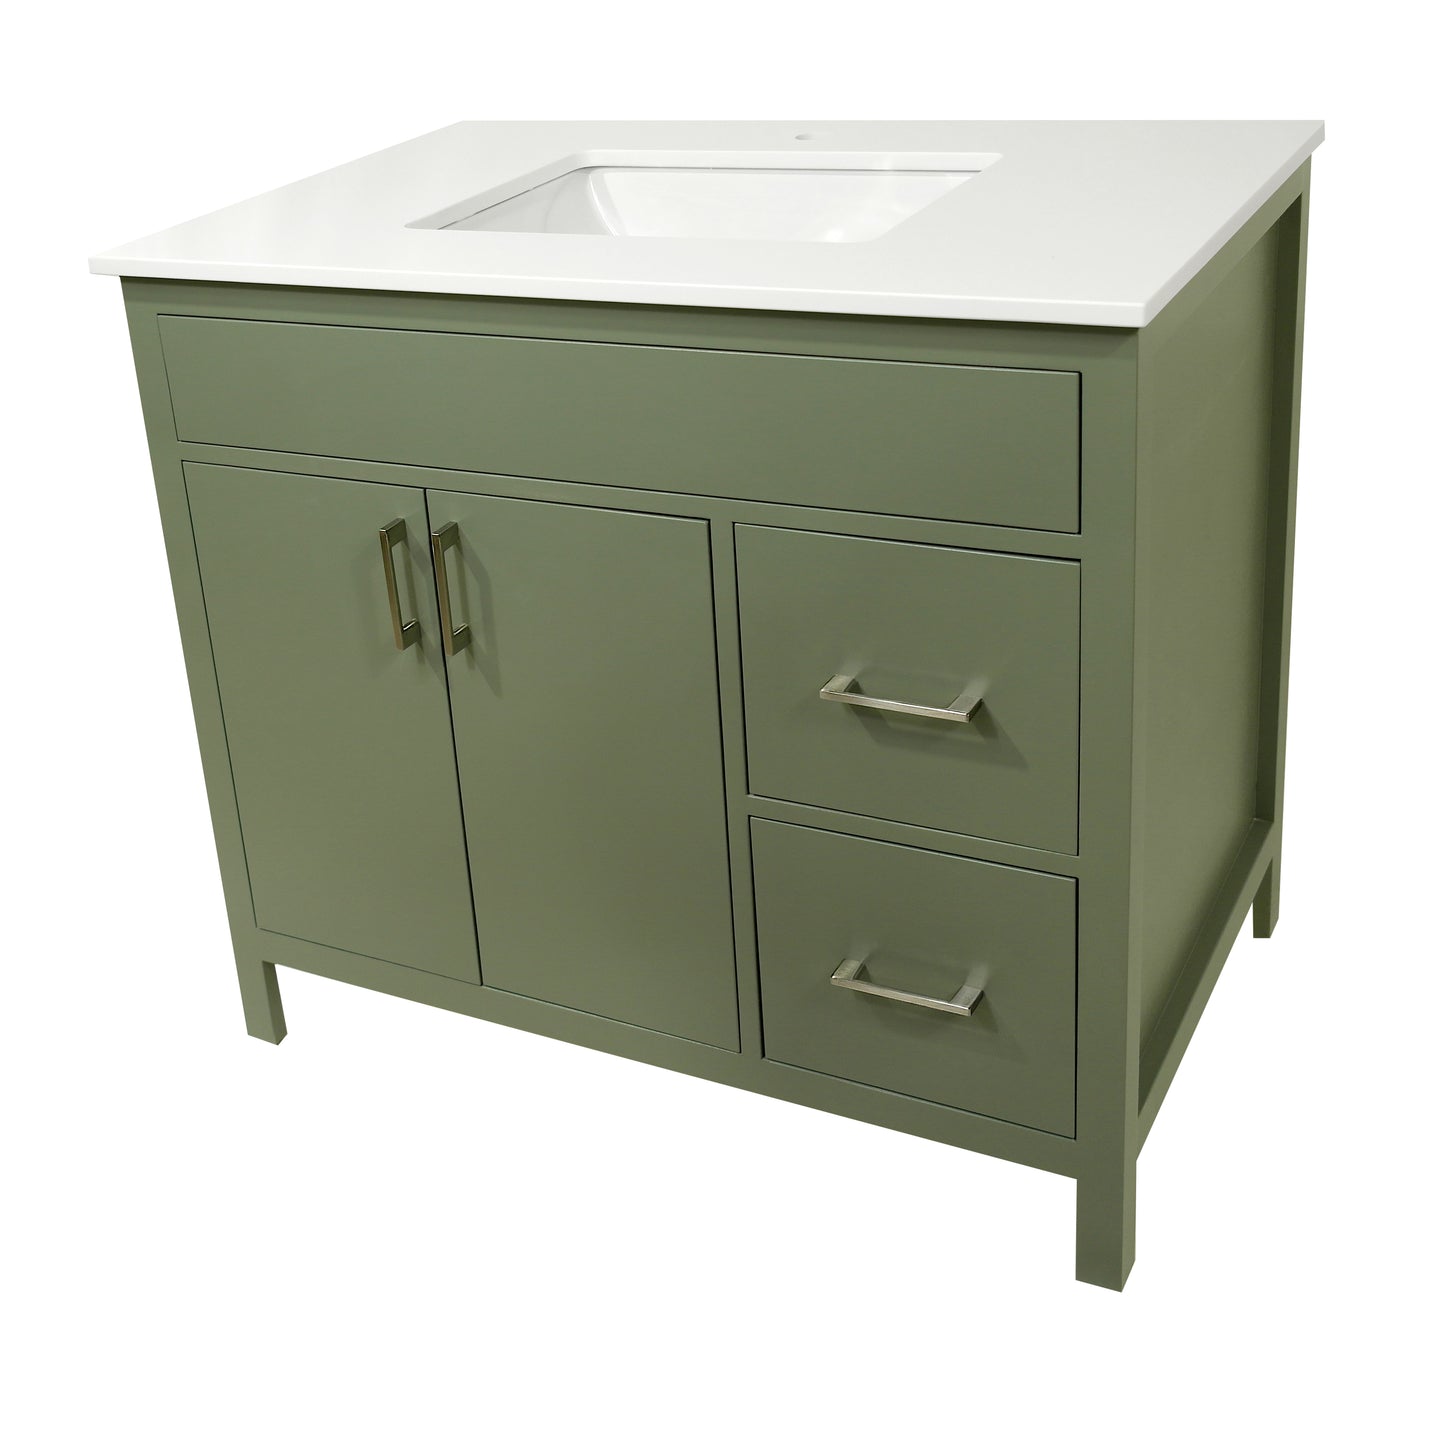 36" Mirea style lush colour  wood bathroom vanity with 2 doors and 2 drawers on right side